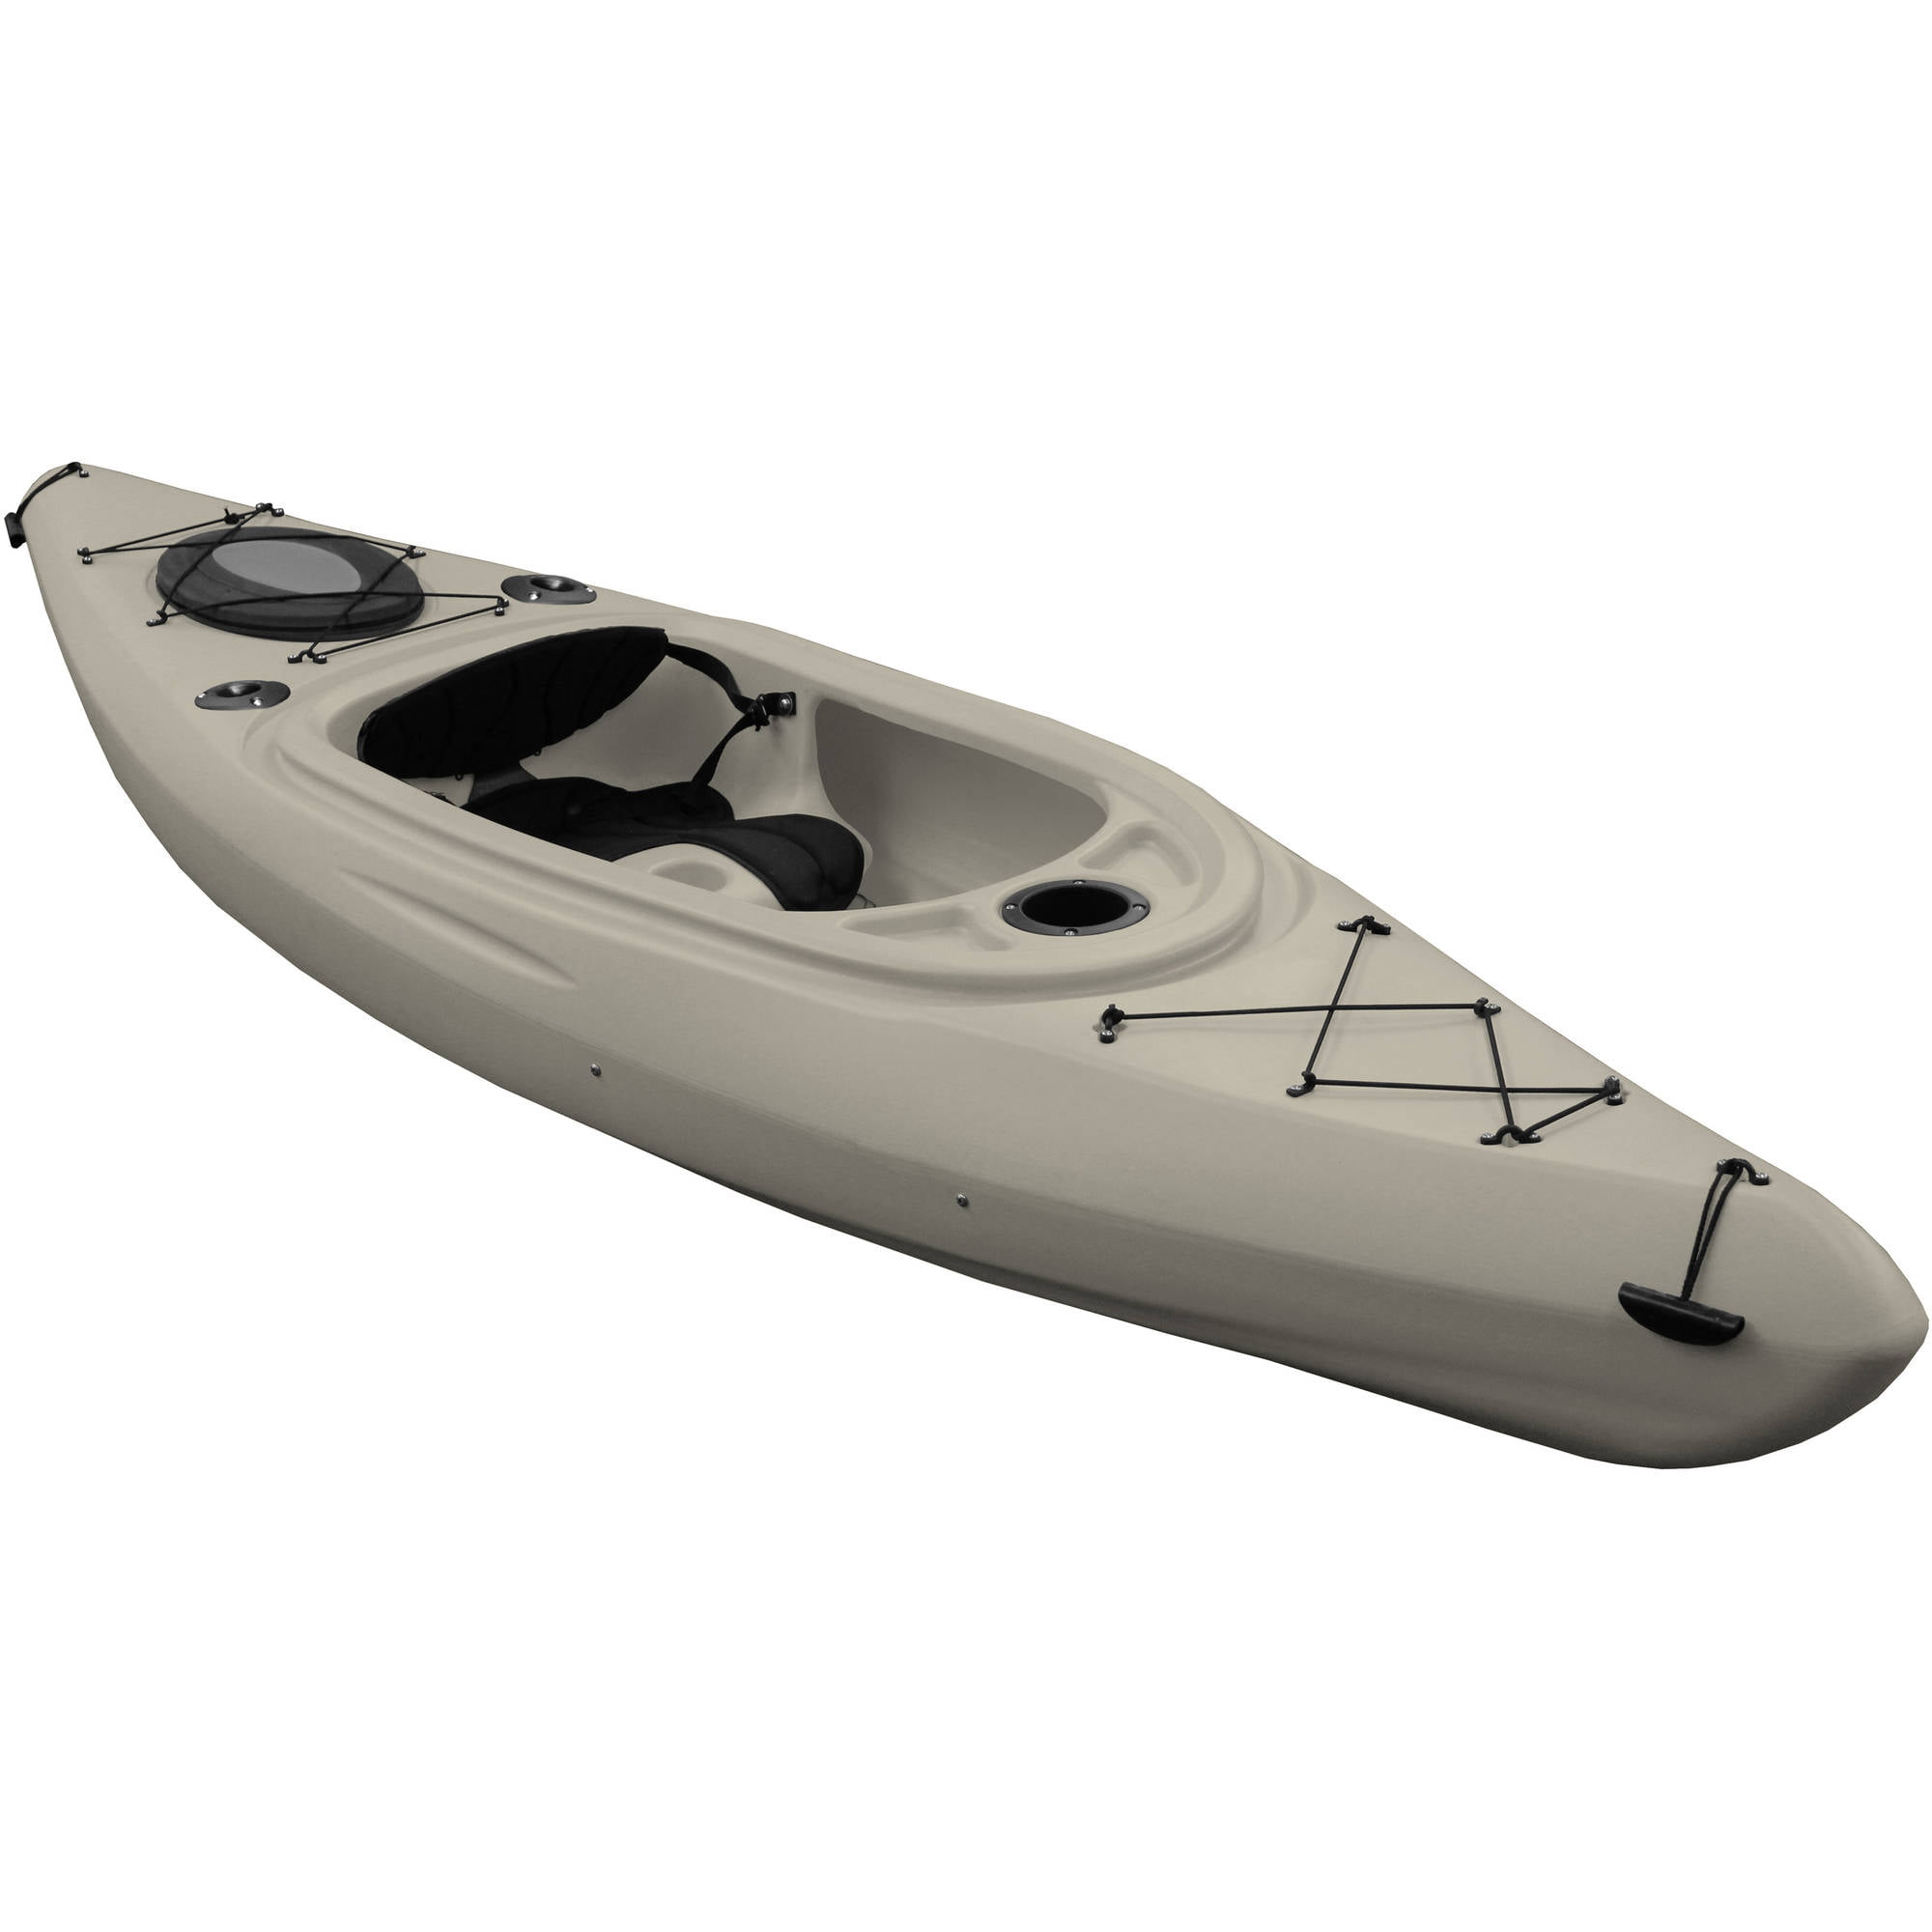 Easy Rider 10'4 Fishing Kayak Sit-In Single Person, 124 (315 cm), Sand  Color